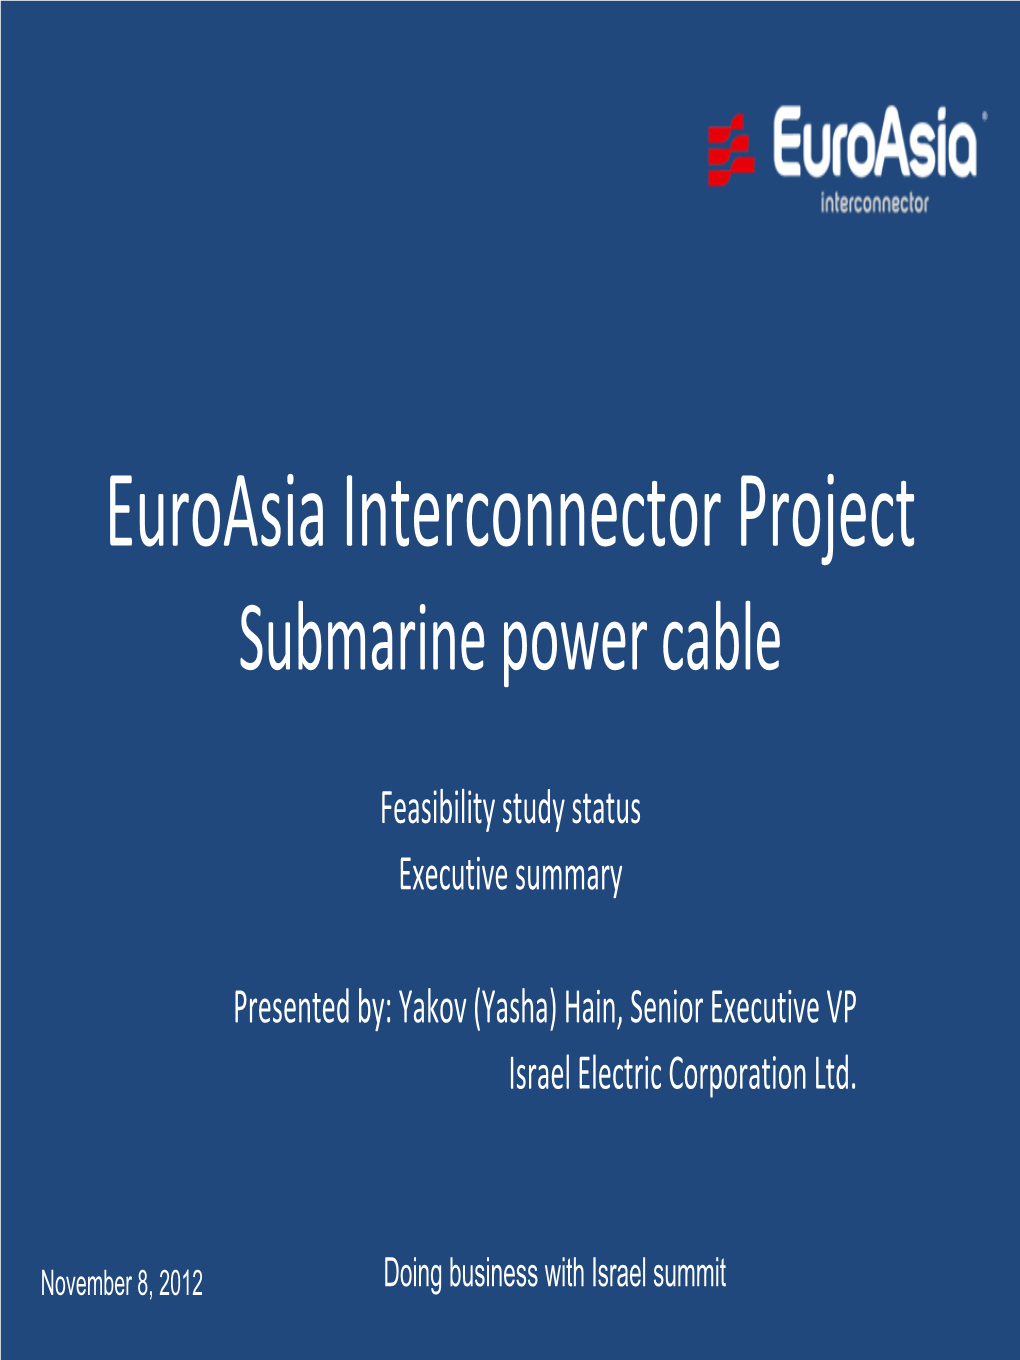 Euroasia Interconnector Project Submarine Power Cable